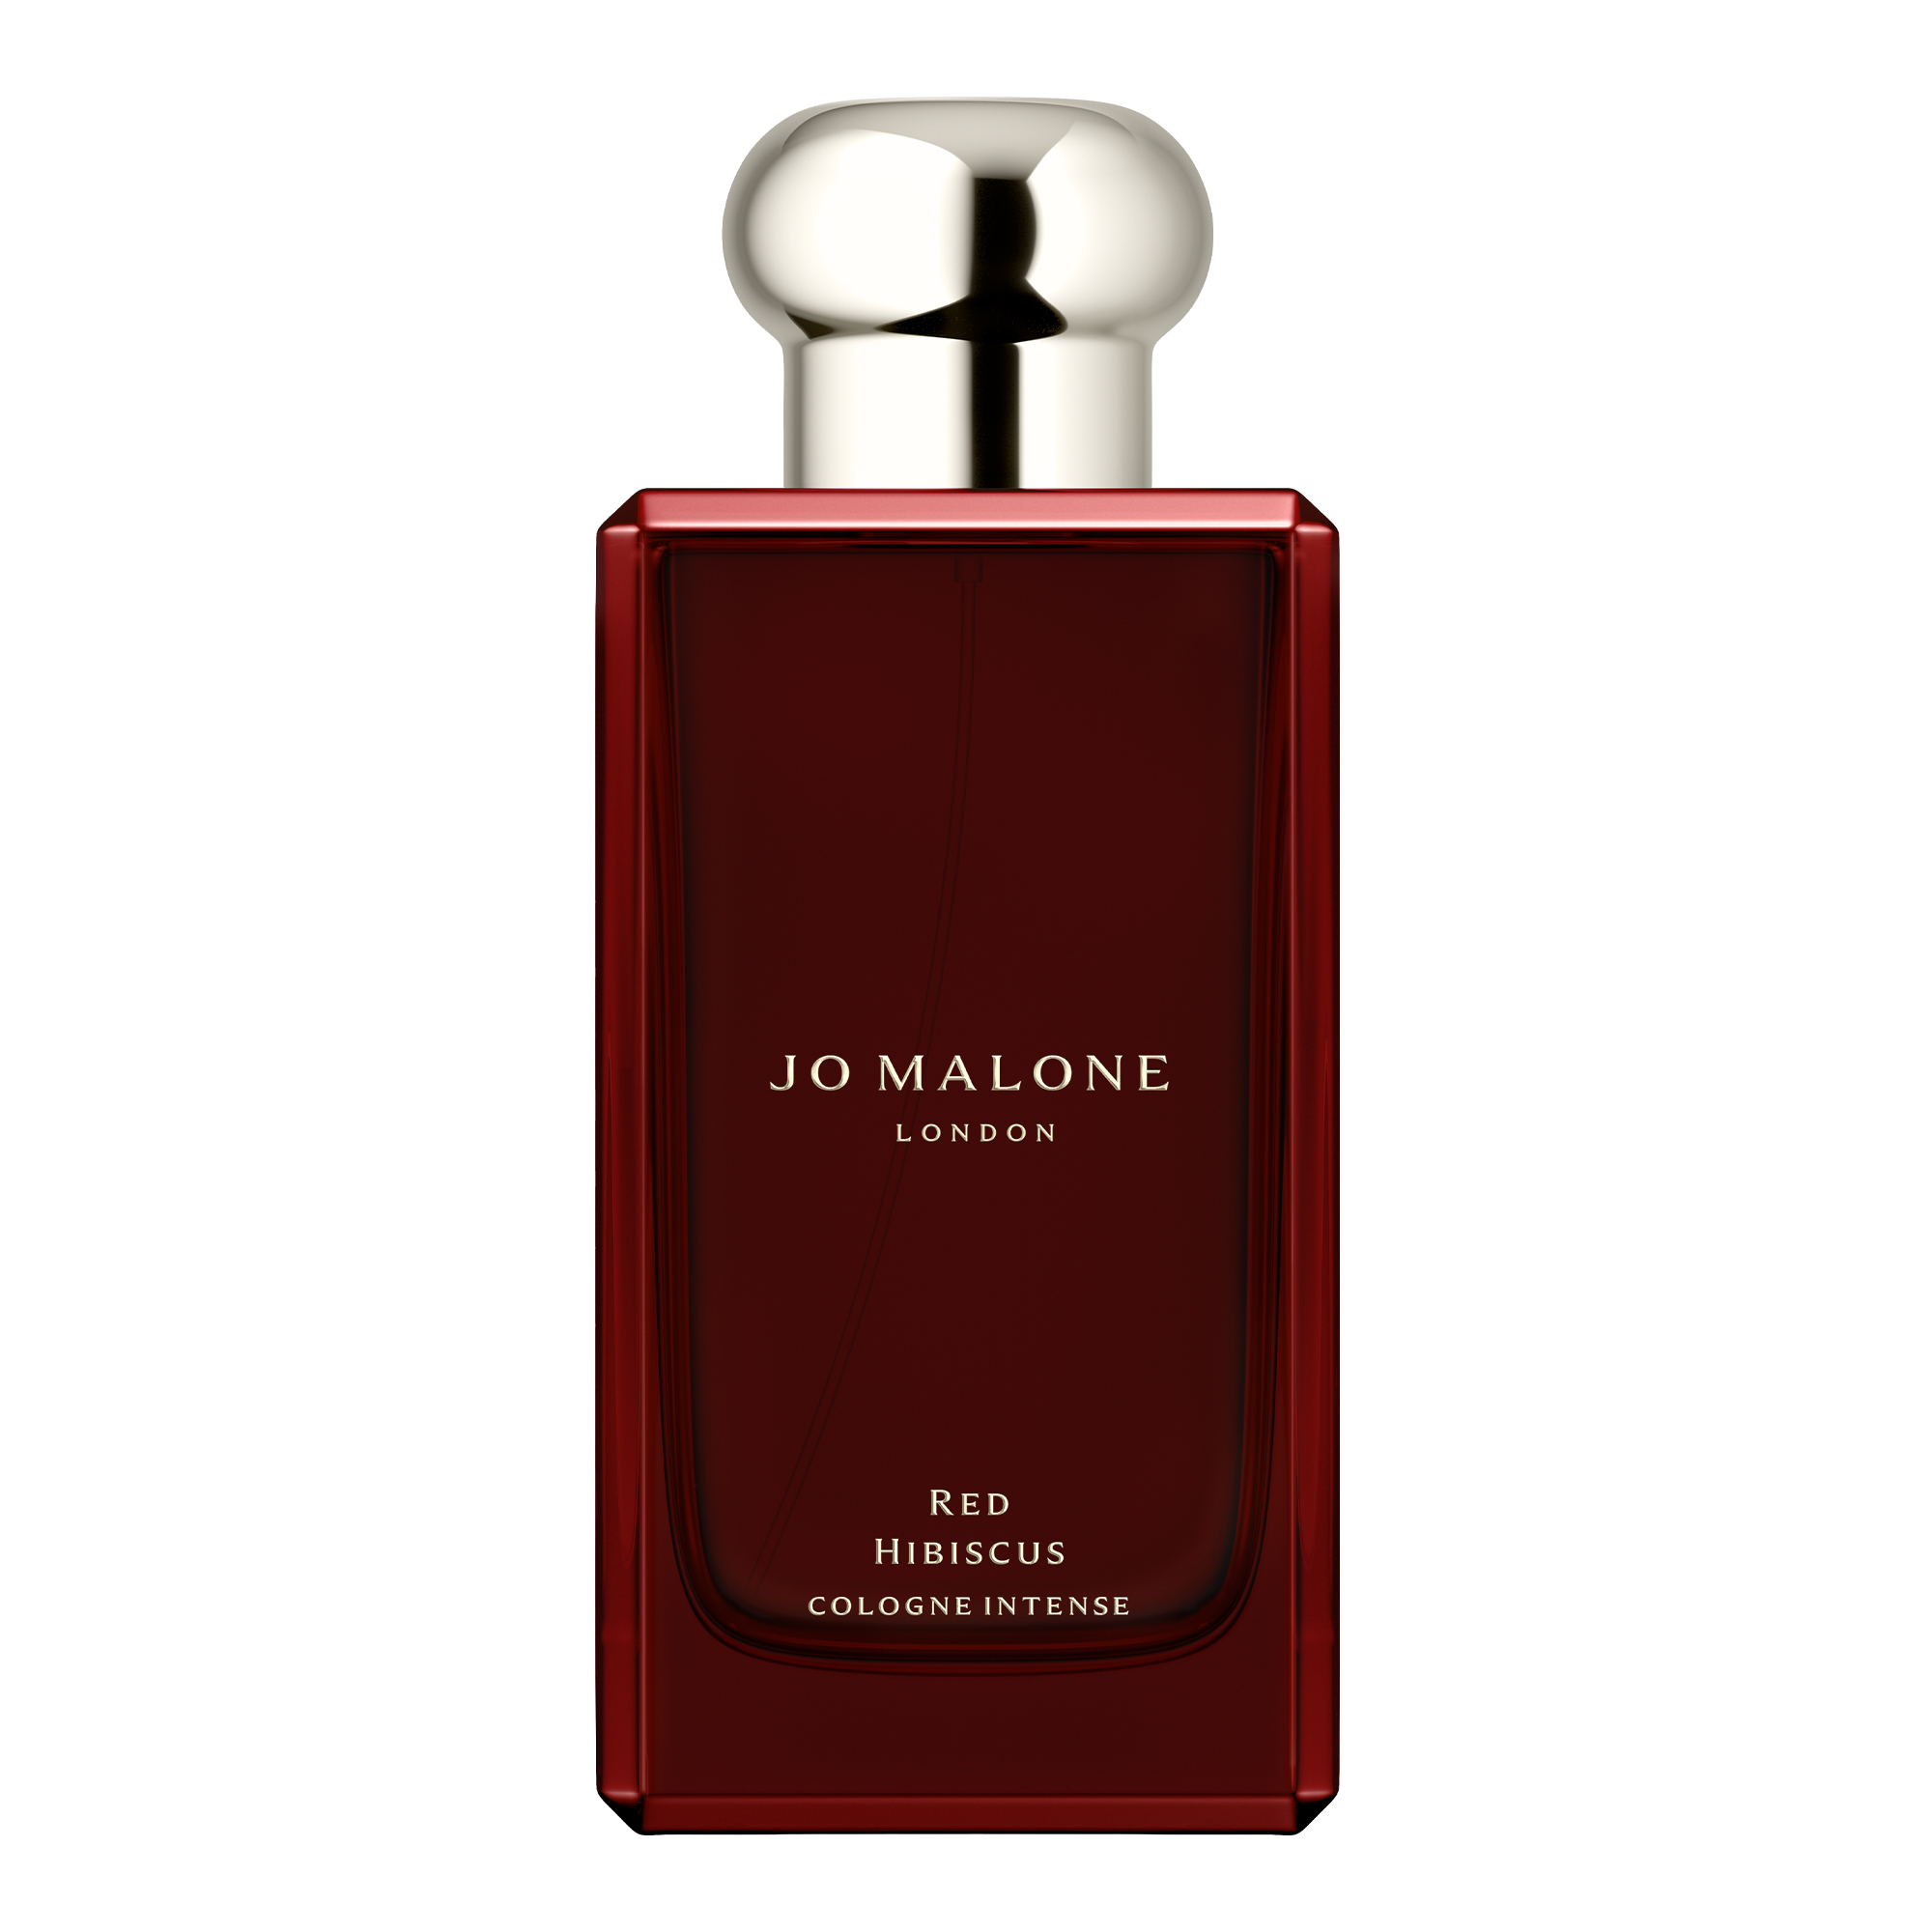  Red Hibiscus Cologne Intense 50ml